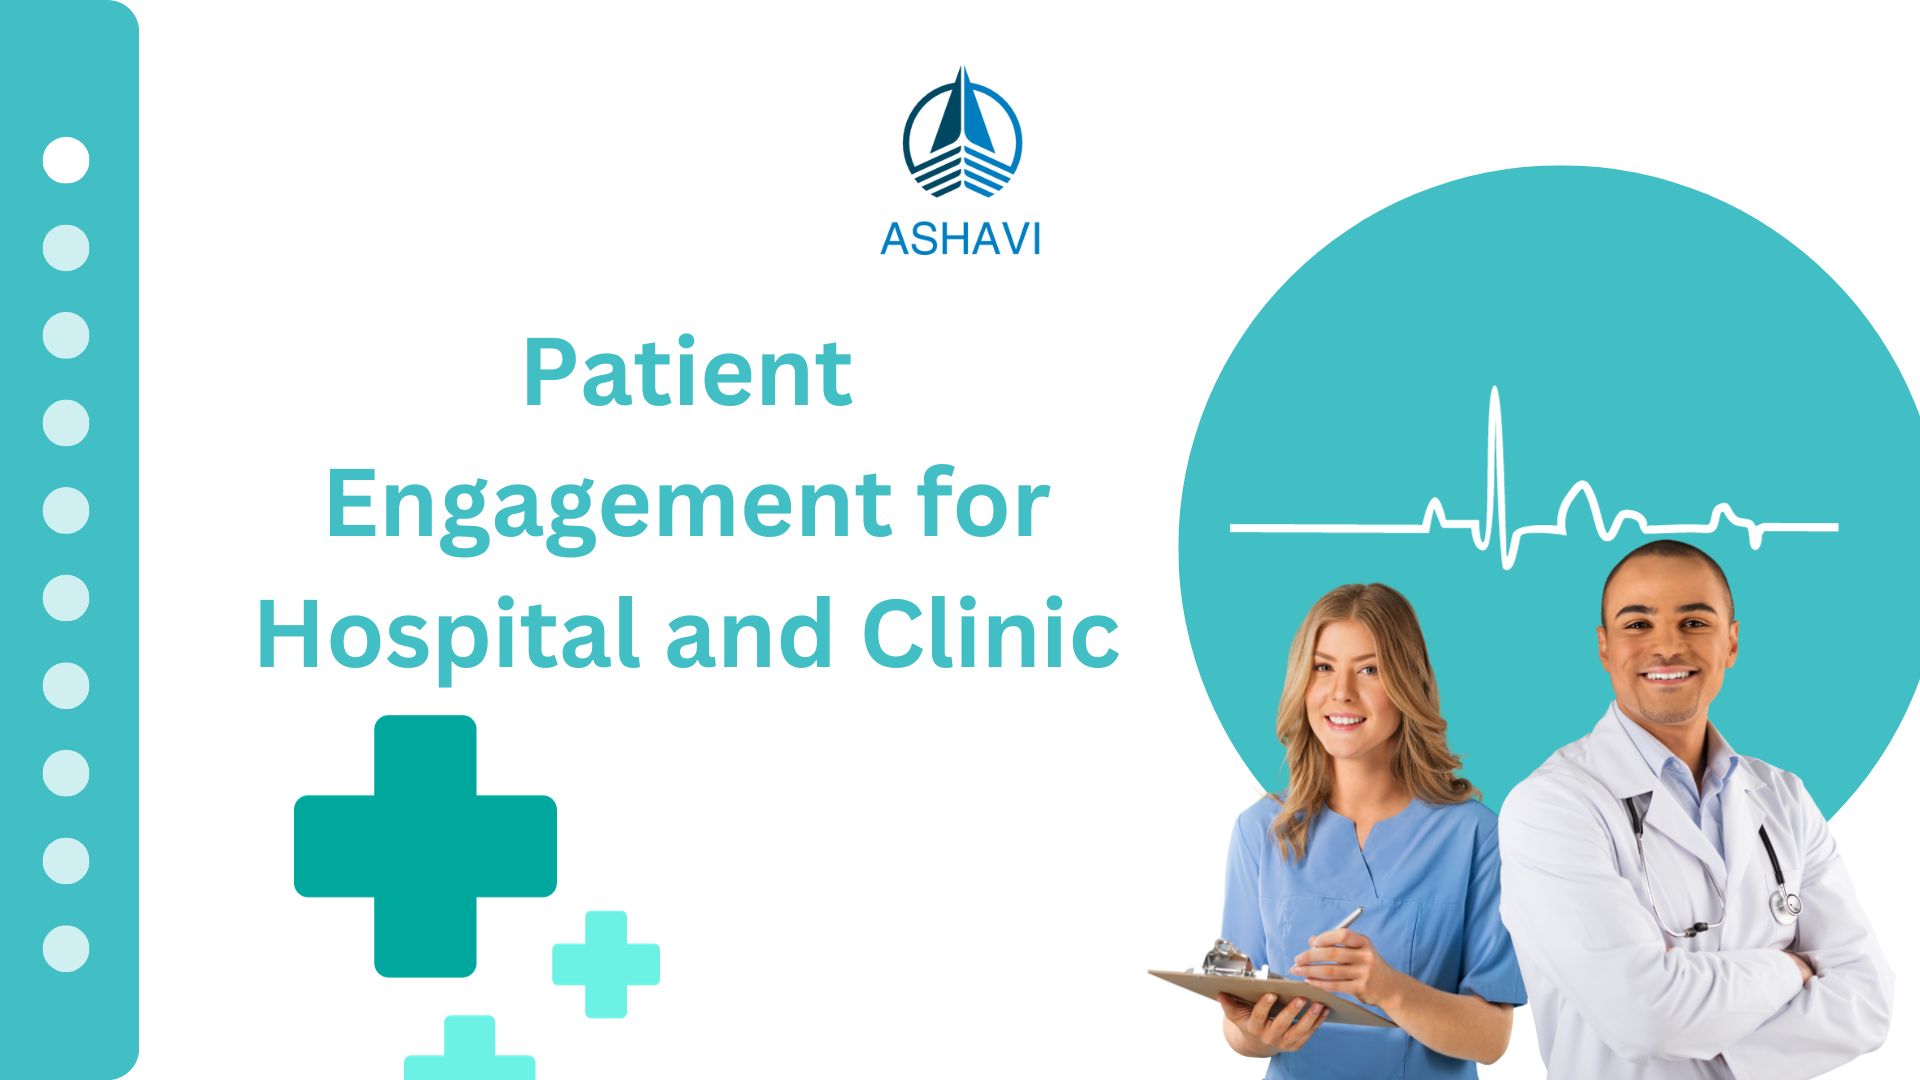 Patient Engagement for Hospital and Clinic